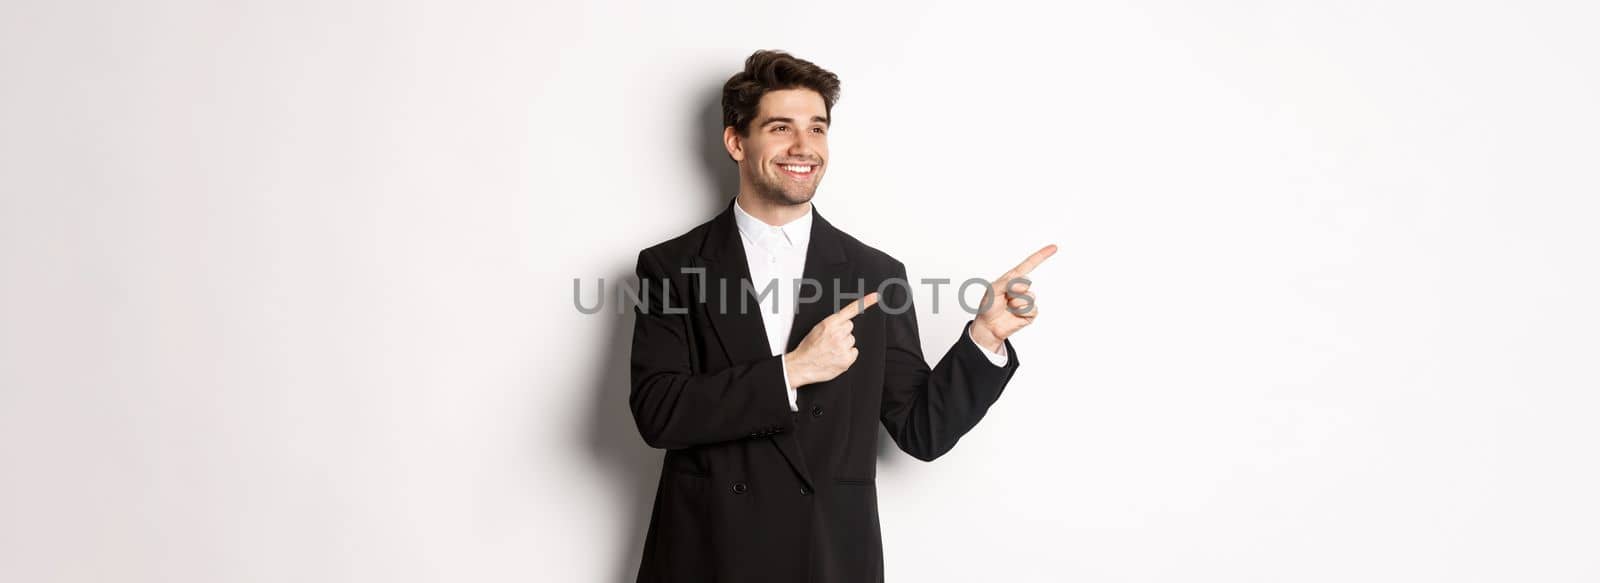 Portrait of successful handsome man in suit, pointing and looking left with pleased smile, showing promo banner, standing over white background.